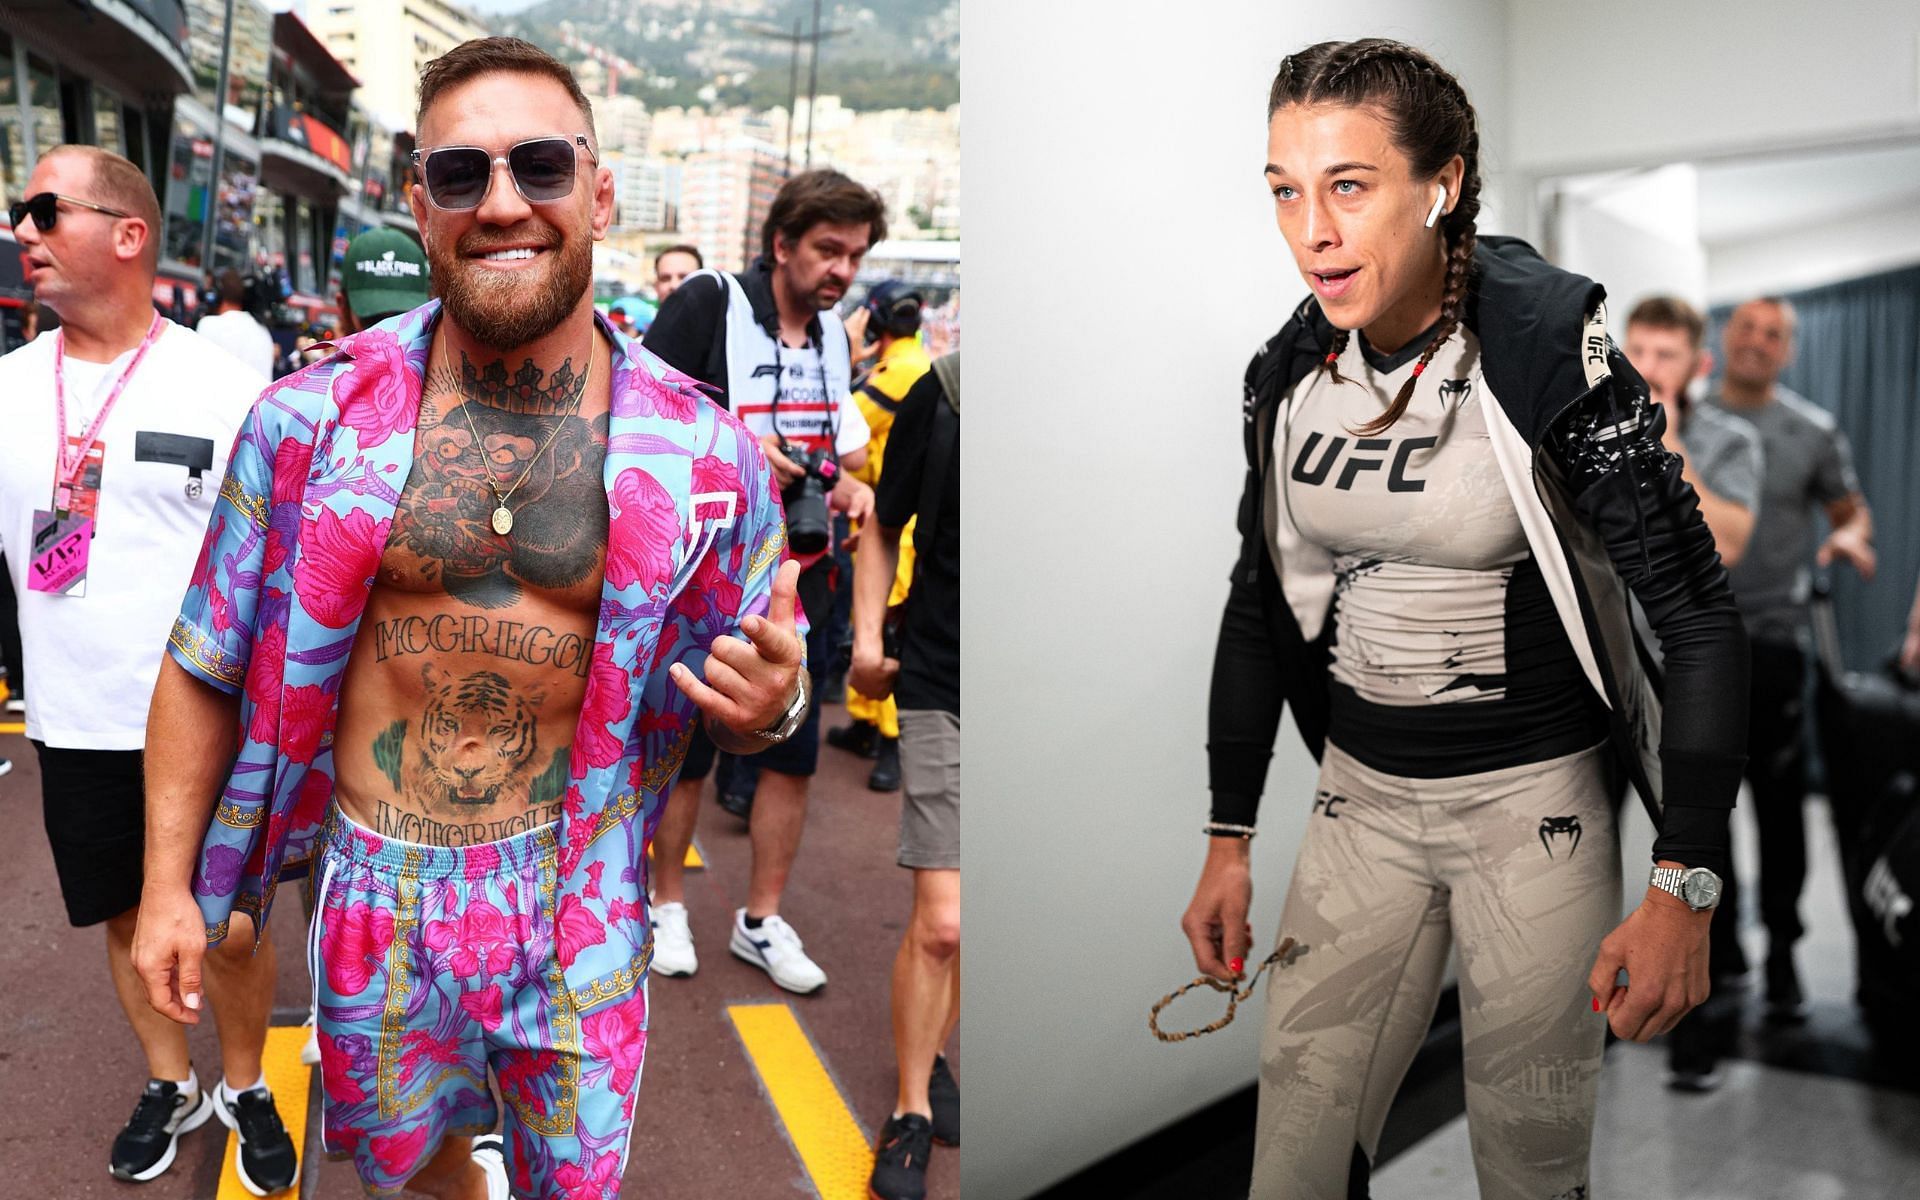 Conor McGregor (left) and Joanna Jedrzejczyk (right) [Photo credit: @UFCEurope on Twitter]